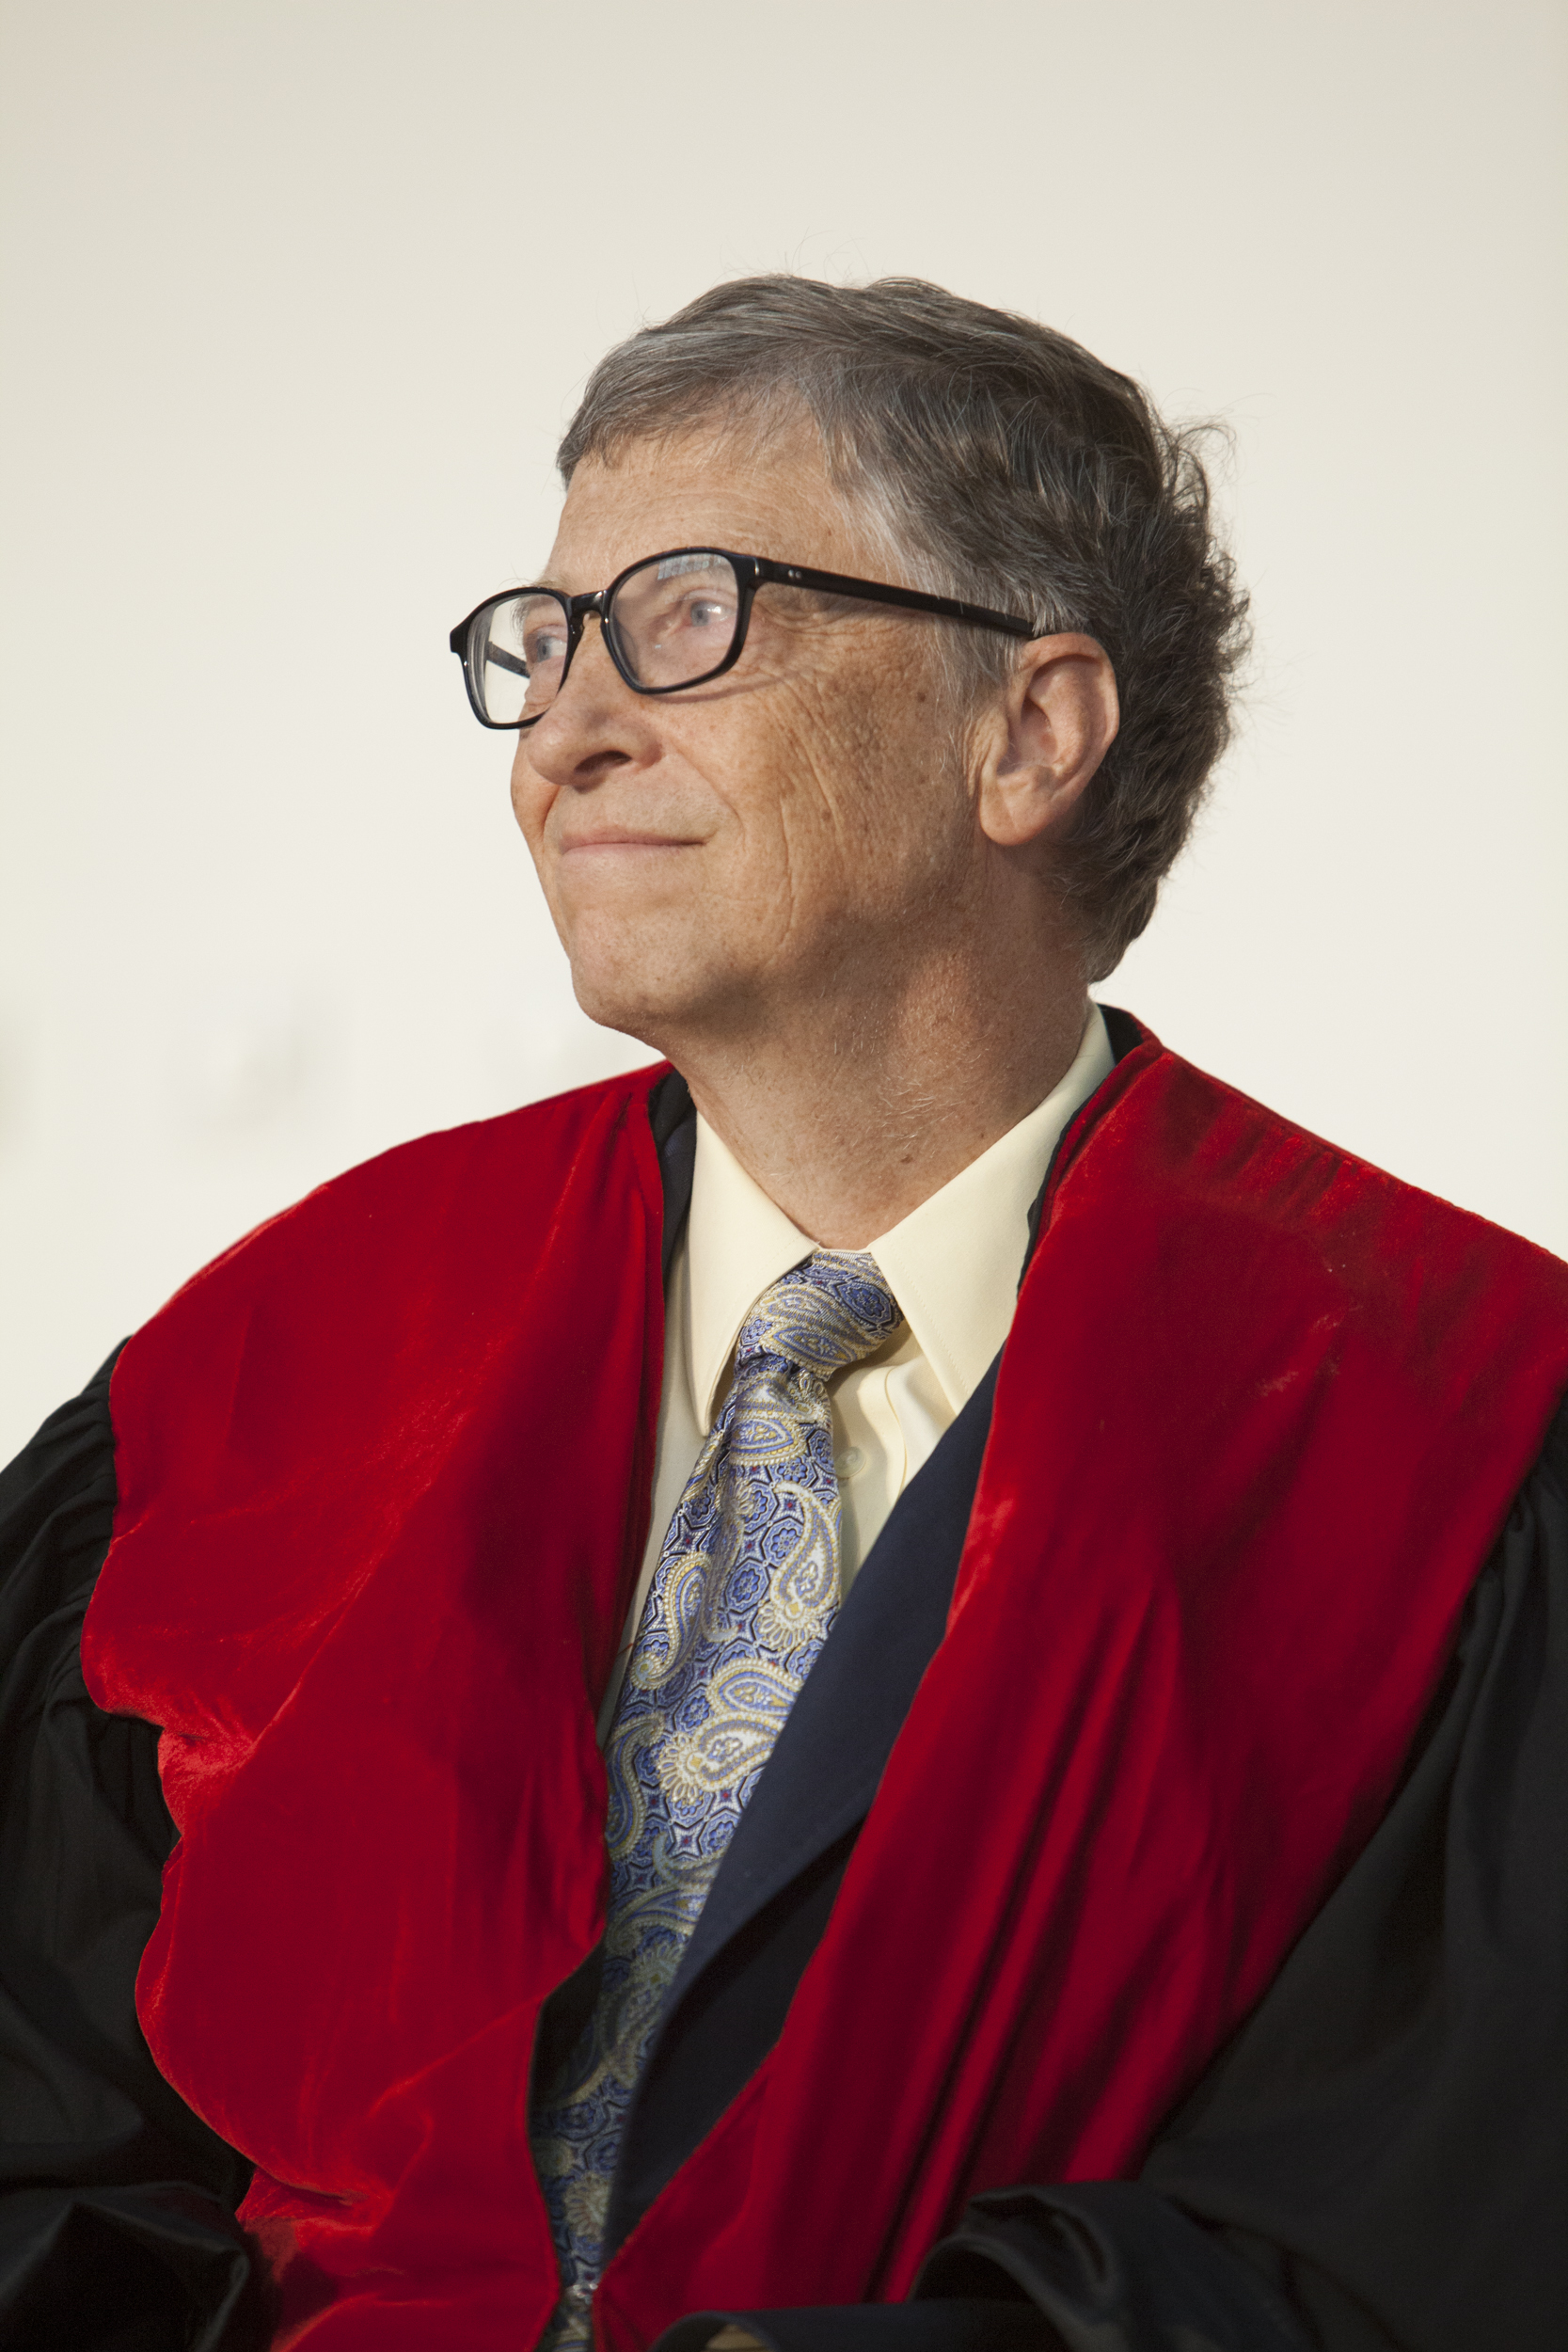  Bill Gates, Co-Chair of Bill and Melinda Gates Foundation is pictured during an Honourary Doctorate Degree ceremony at Addis Ababa University in Addis Ababa Ethiopia on 24 July 2014. Bill Gates was awarded with an honorary doctorate degree from the 